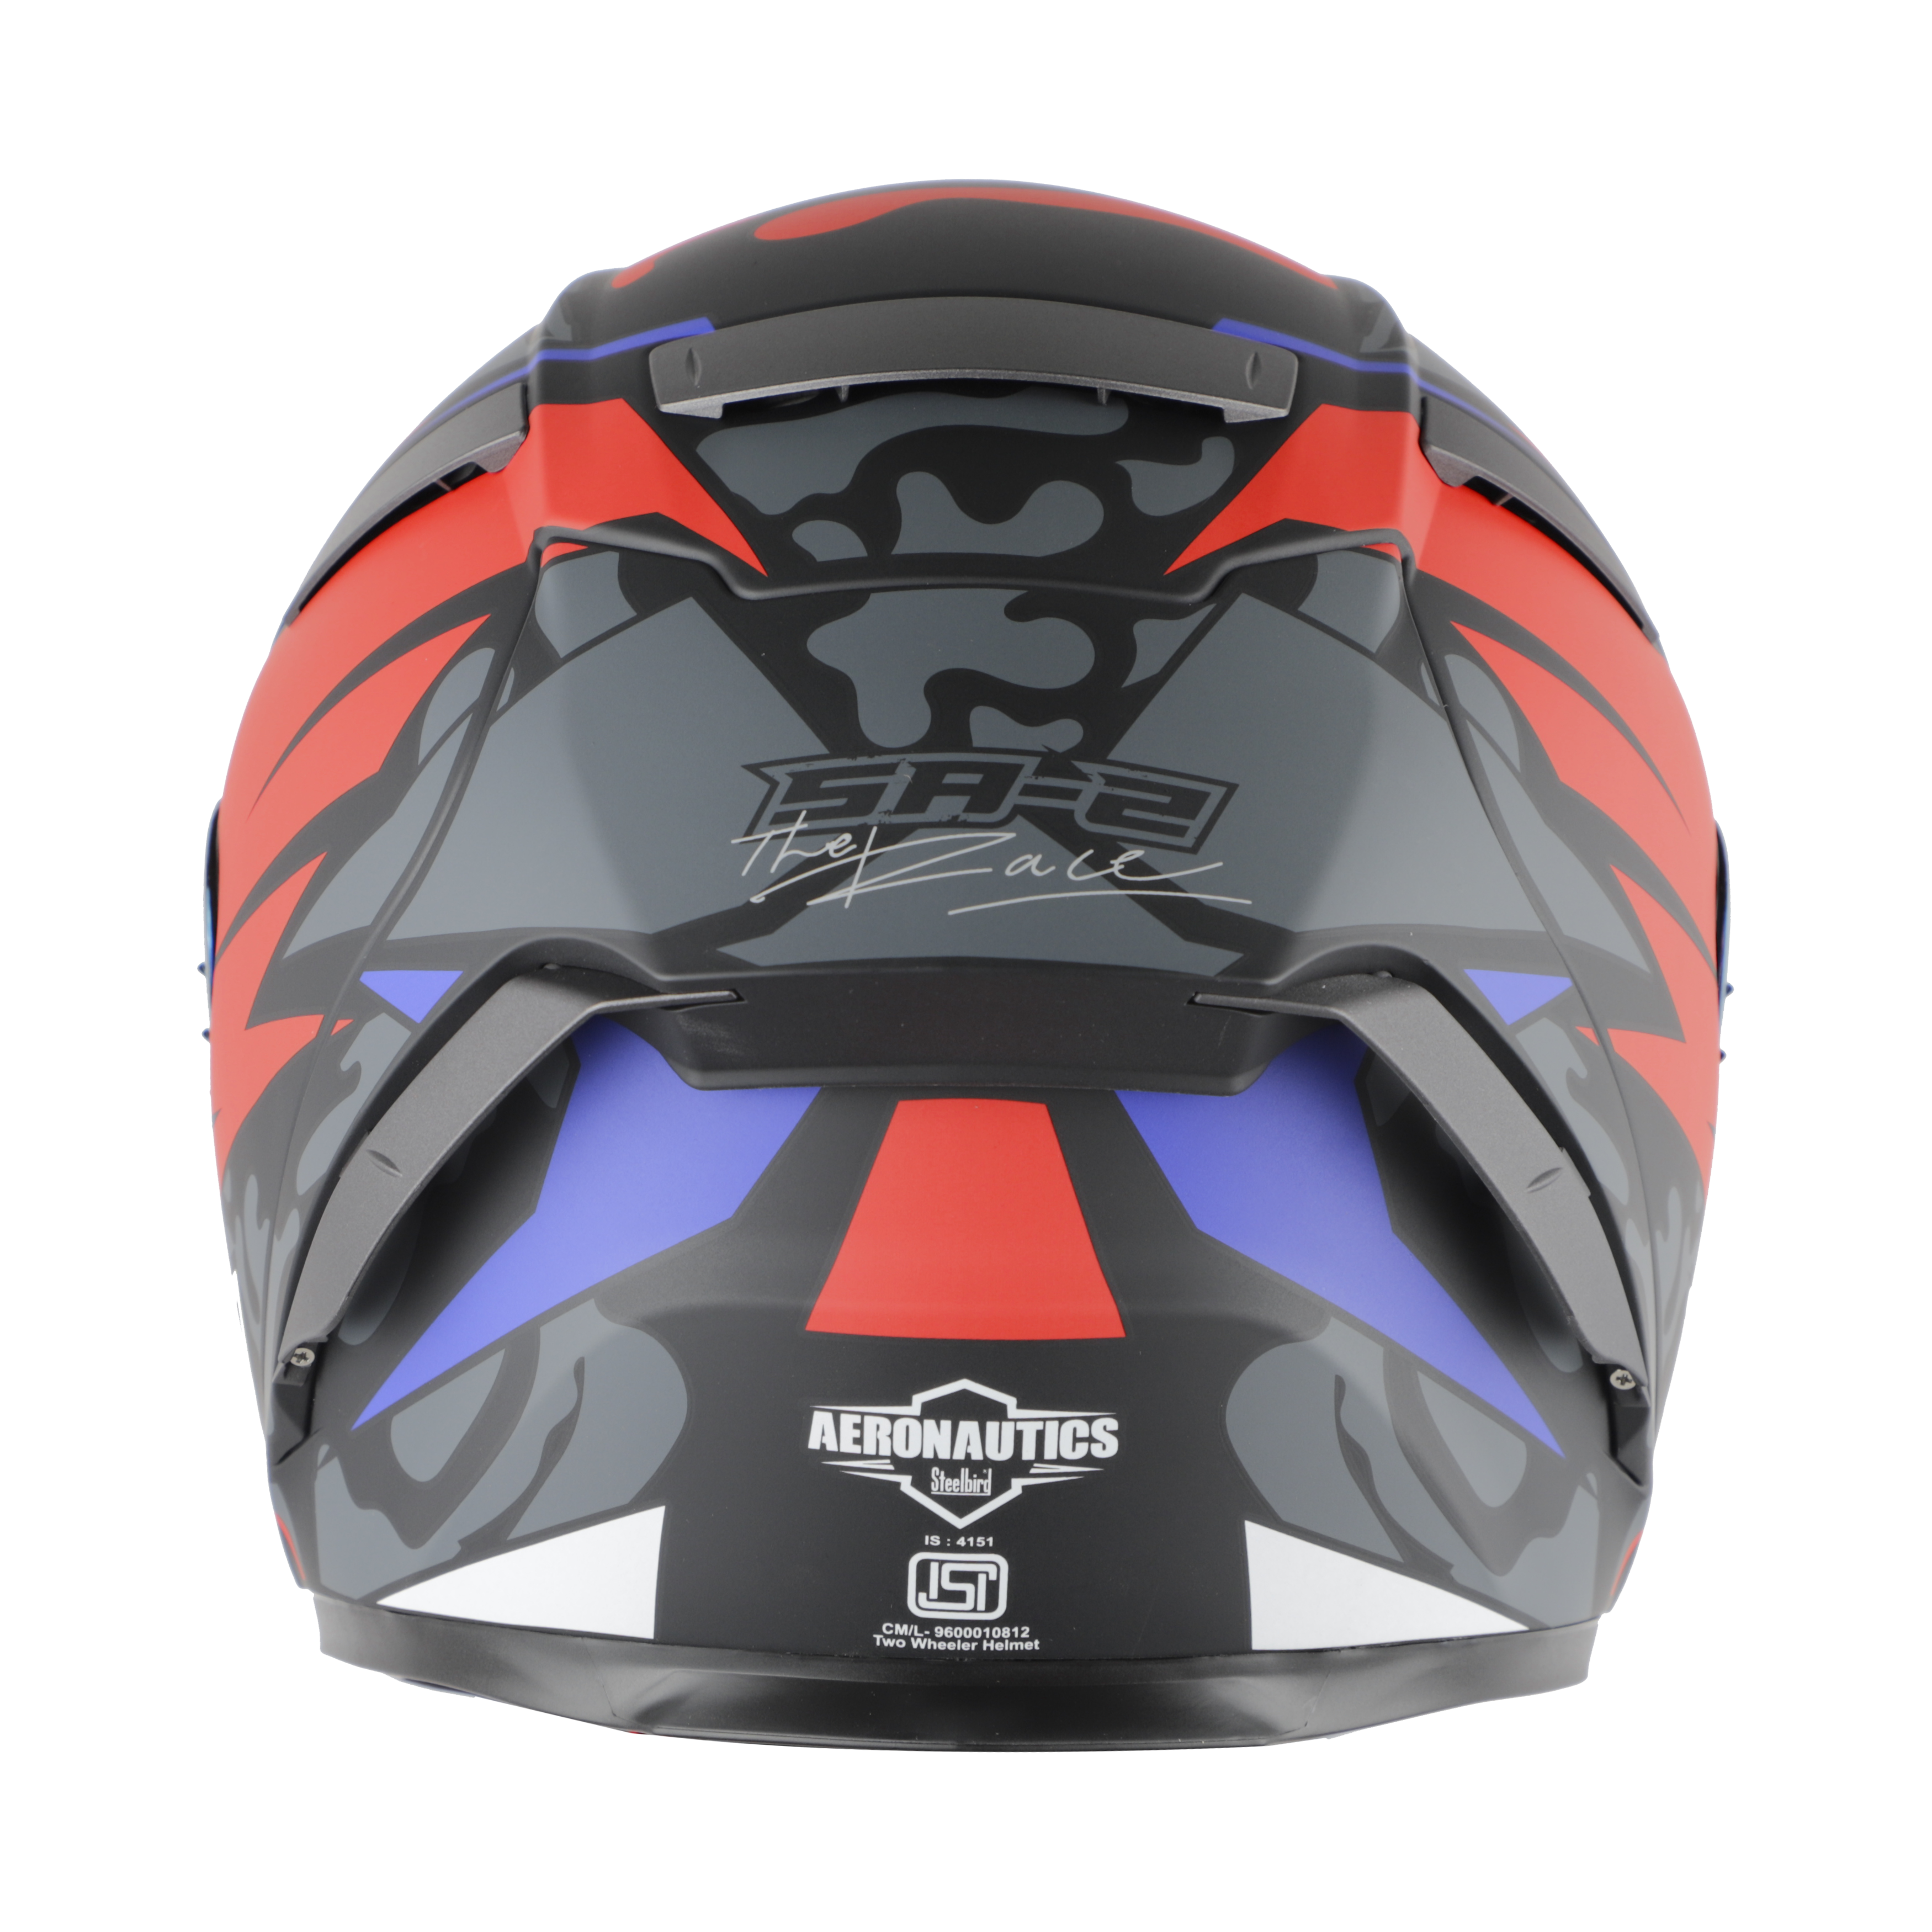 SA-2 TERMINATOR 3.0 MAT BLACK WITH RED FITTED WITH CLEAR VISOR EXTRA GOLD CHROME VISOR FREE (WITH ANTI-FOR SHIELD HOLDER)